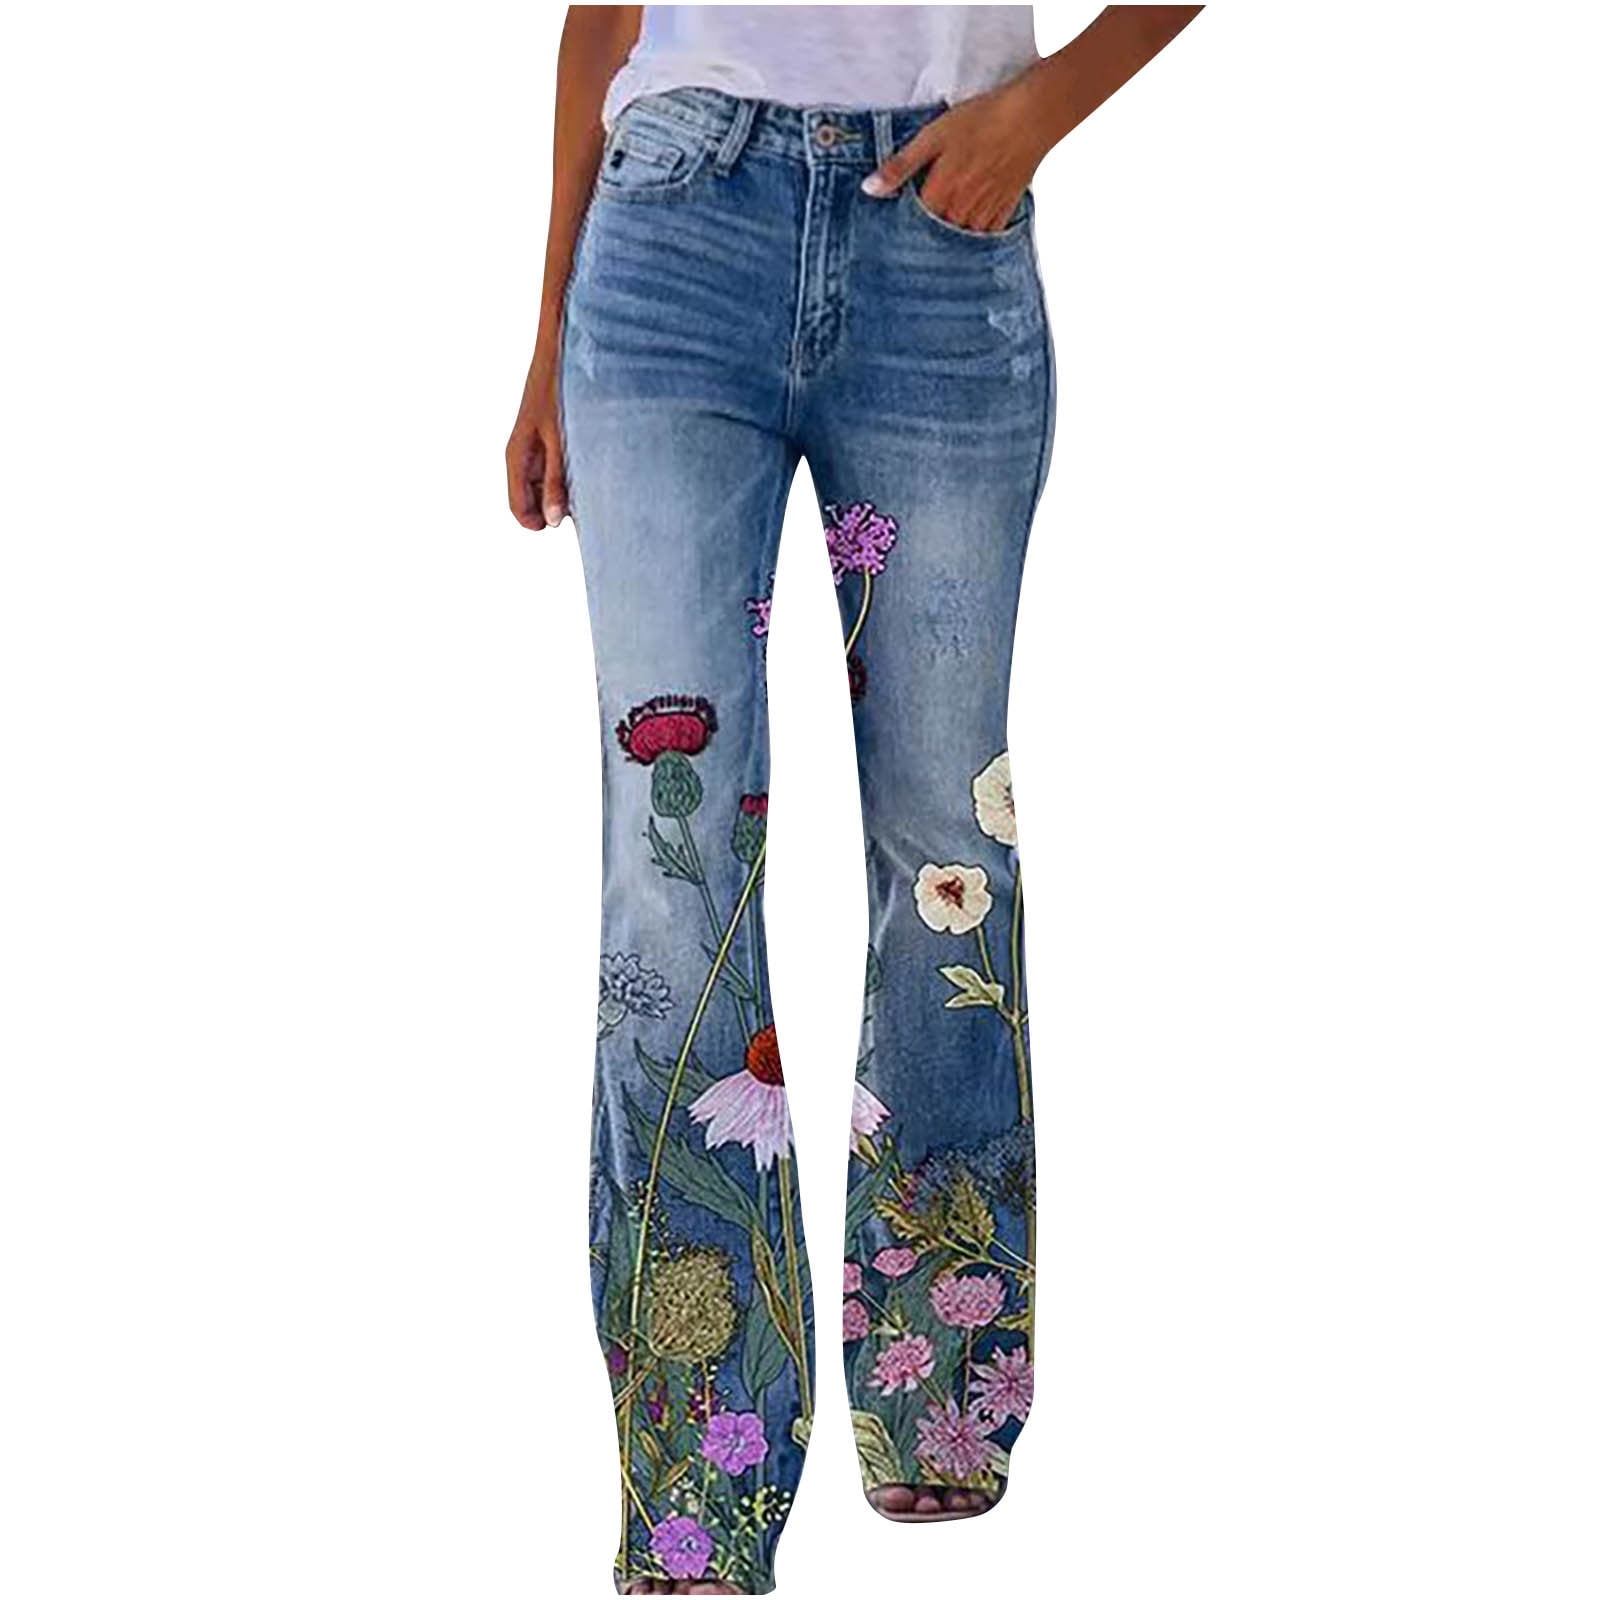 Y2K Low Waist Jeans For Women Vintage Embroidery Stretch